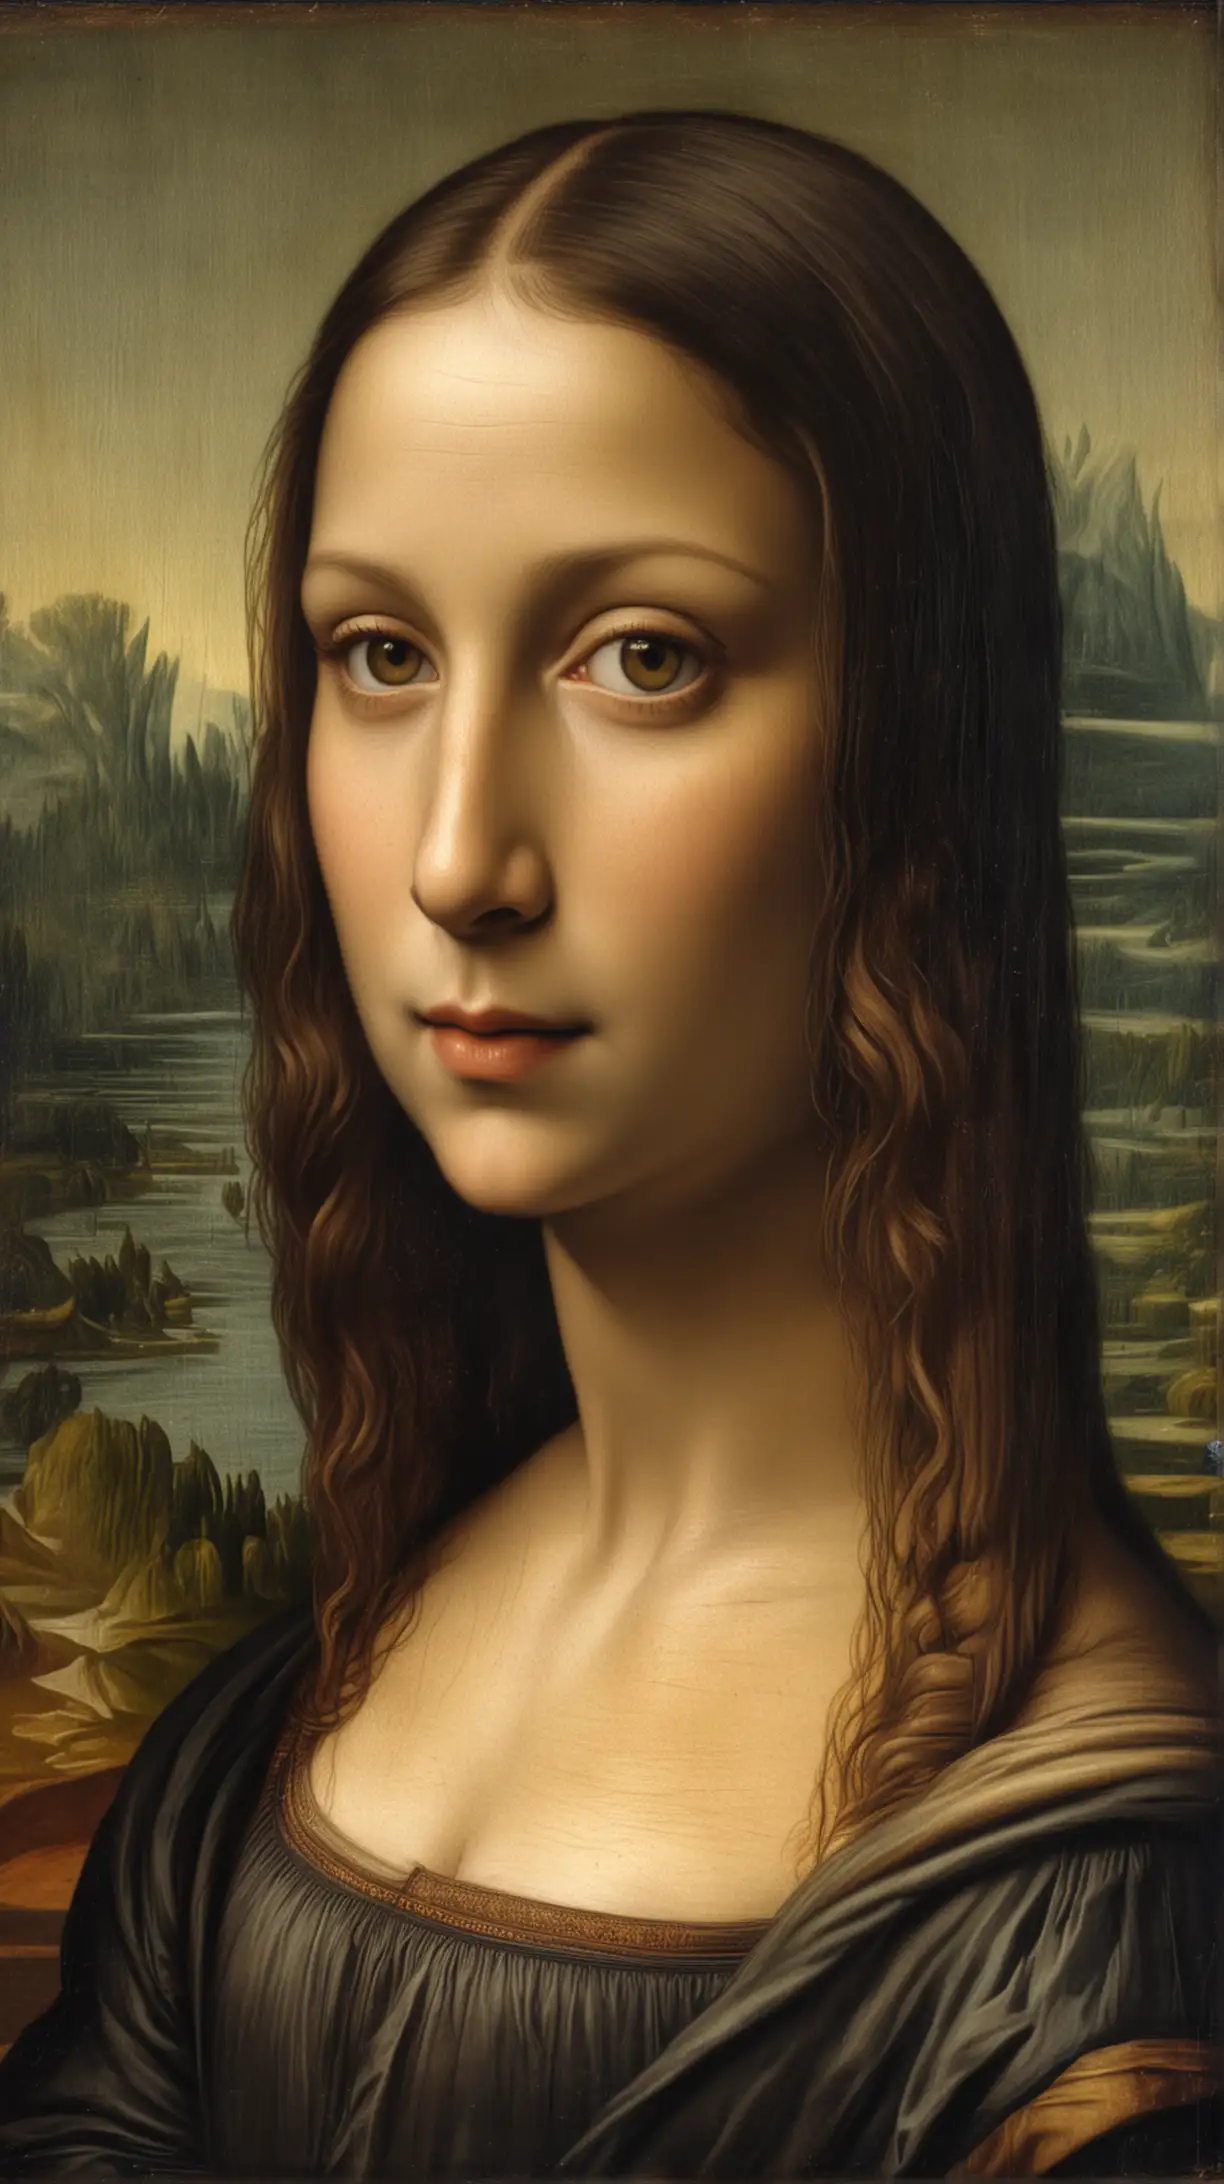 Mona Lisa by Leonardo da Vinci: This enigmatic portrait is perhaps the most recognizable painting in the world.  